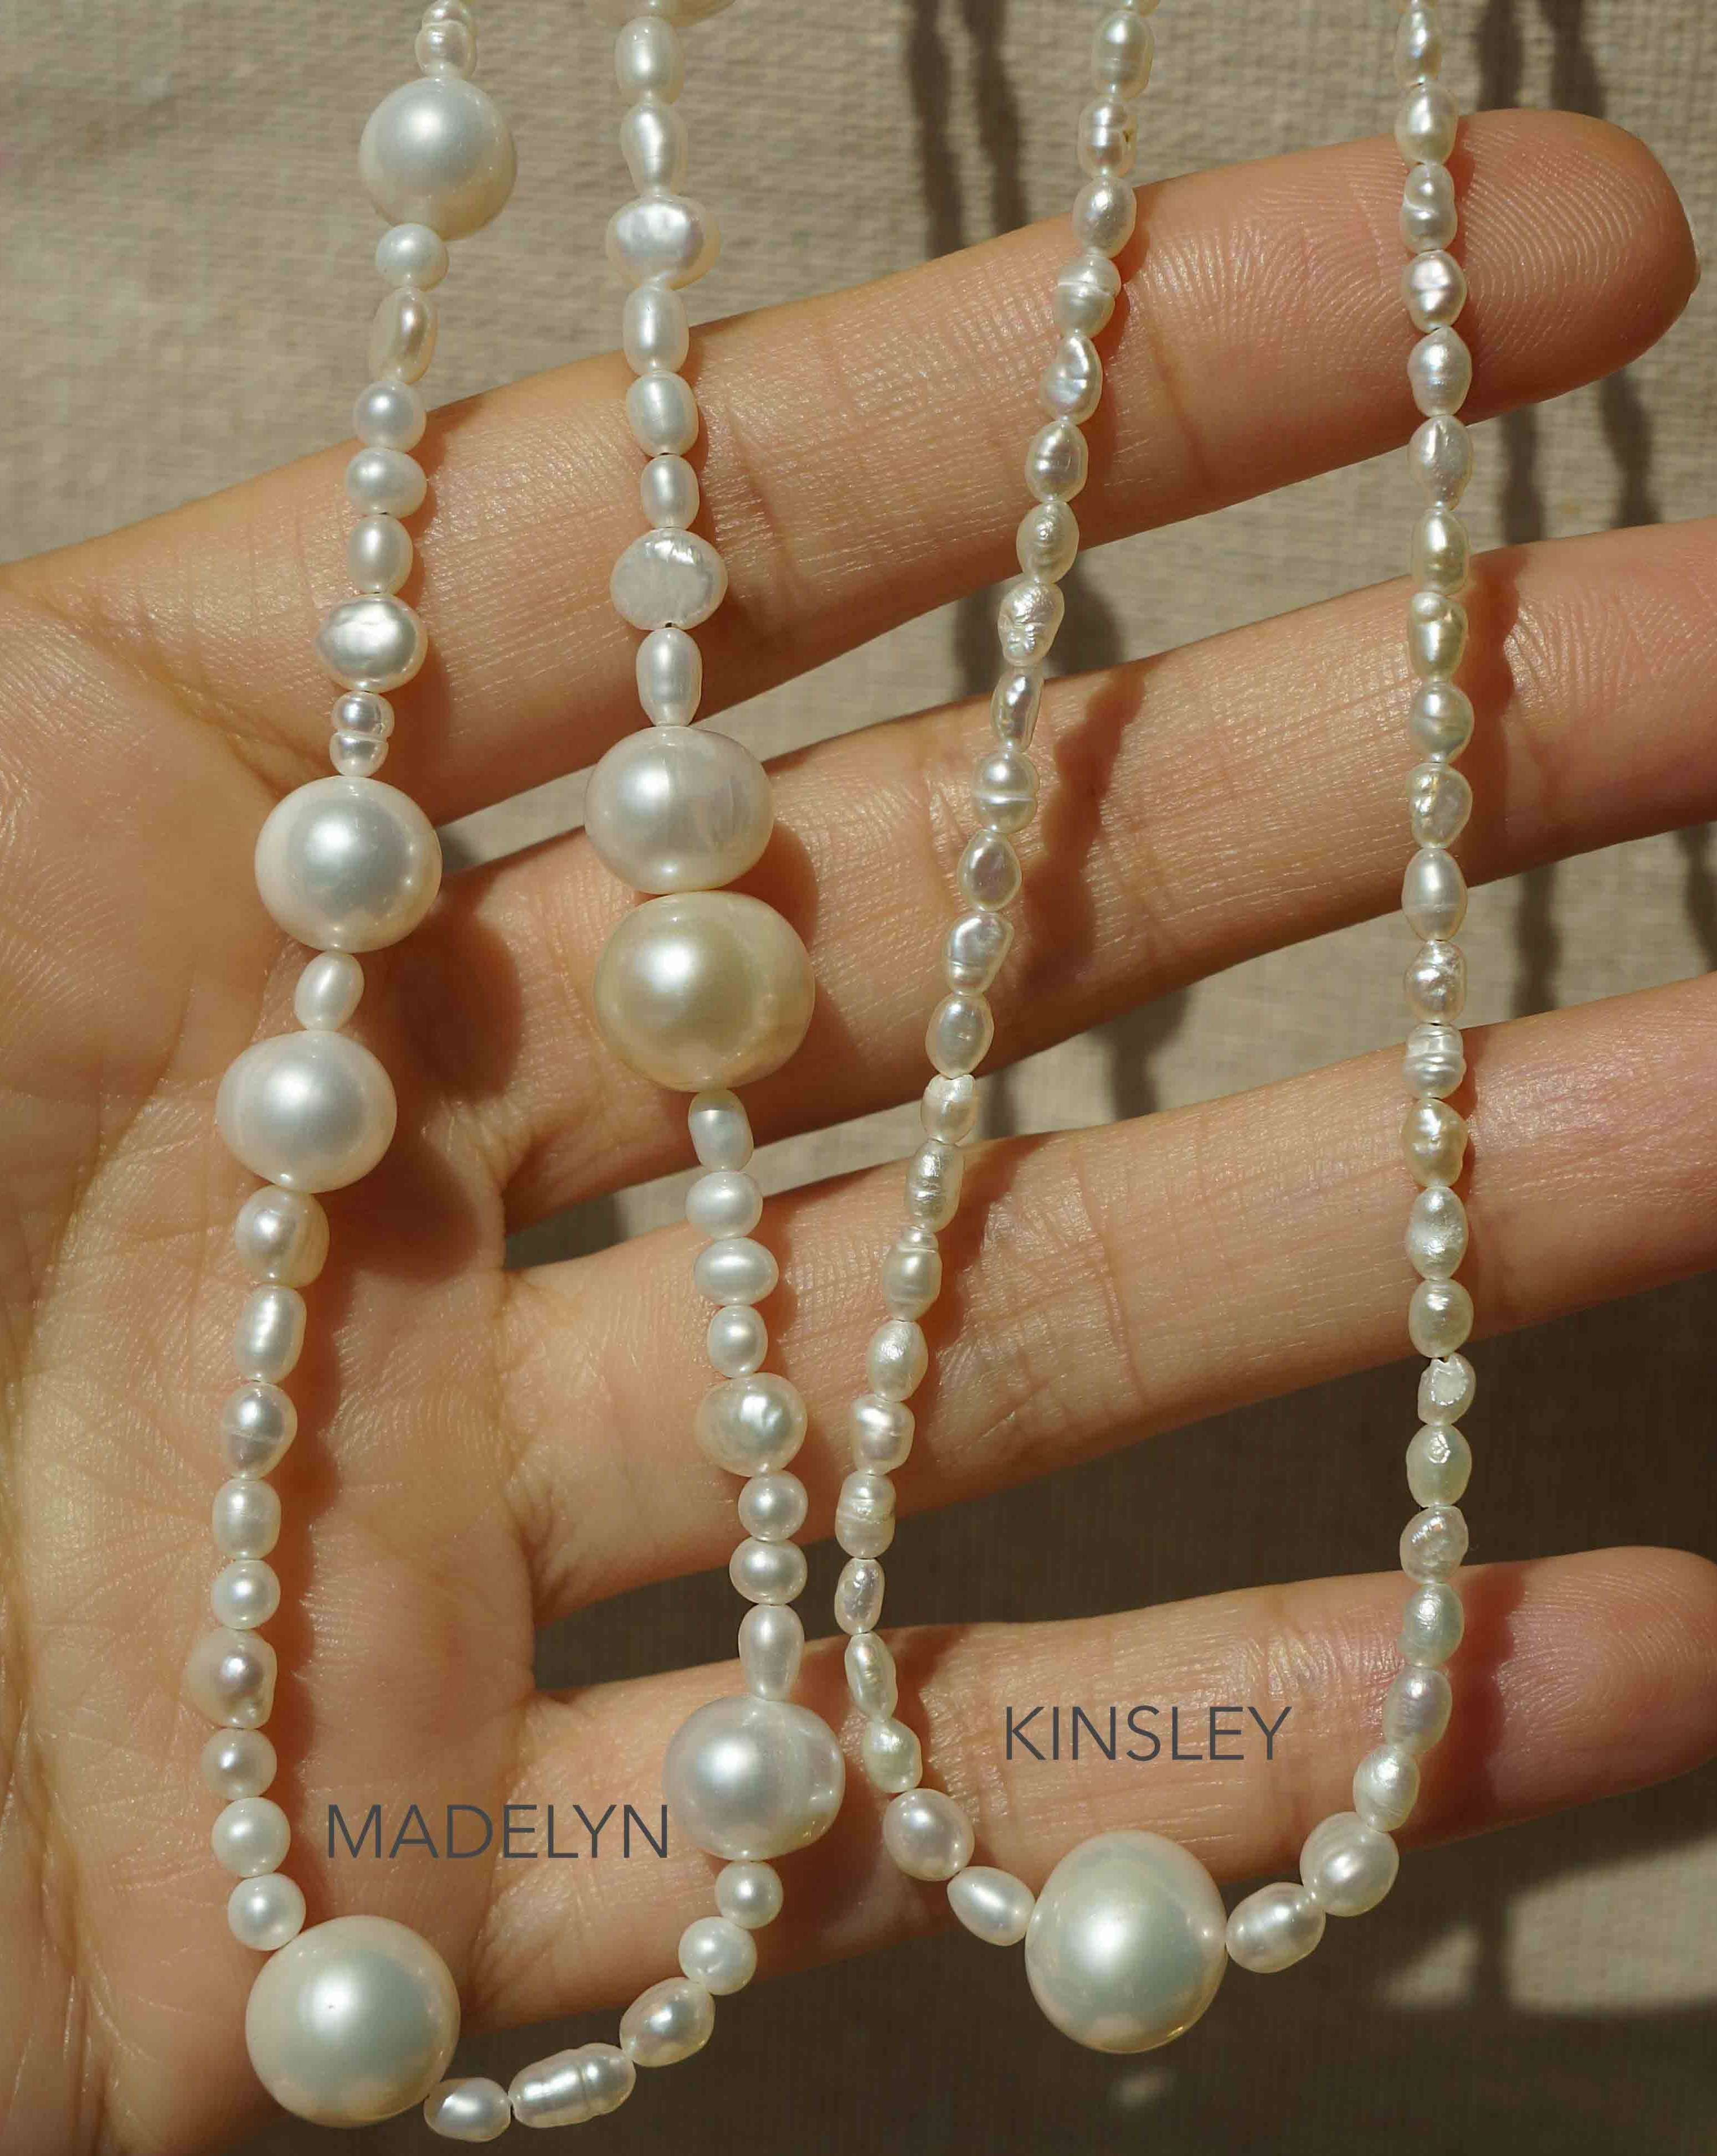 Madelyn Necklace by KOZAKH. A 14 to 16 inch adjustable length necklace with a strand of Freshwater Pearls, with a 14K Gold Filled clasp.